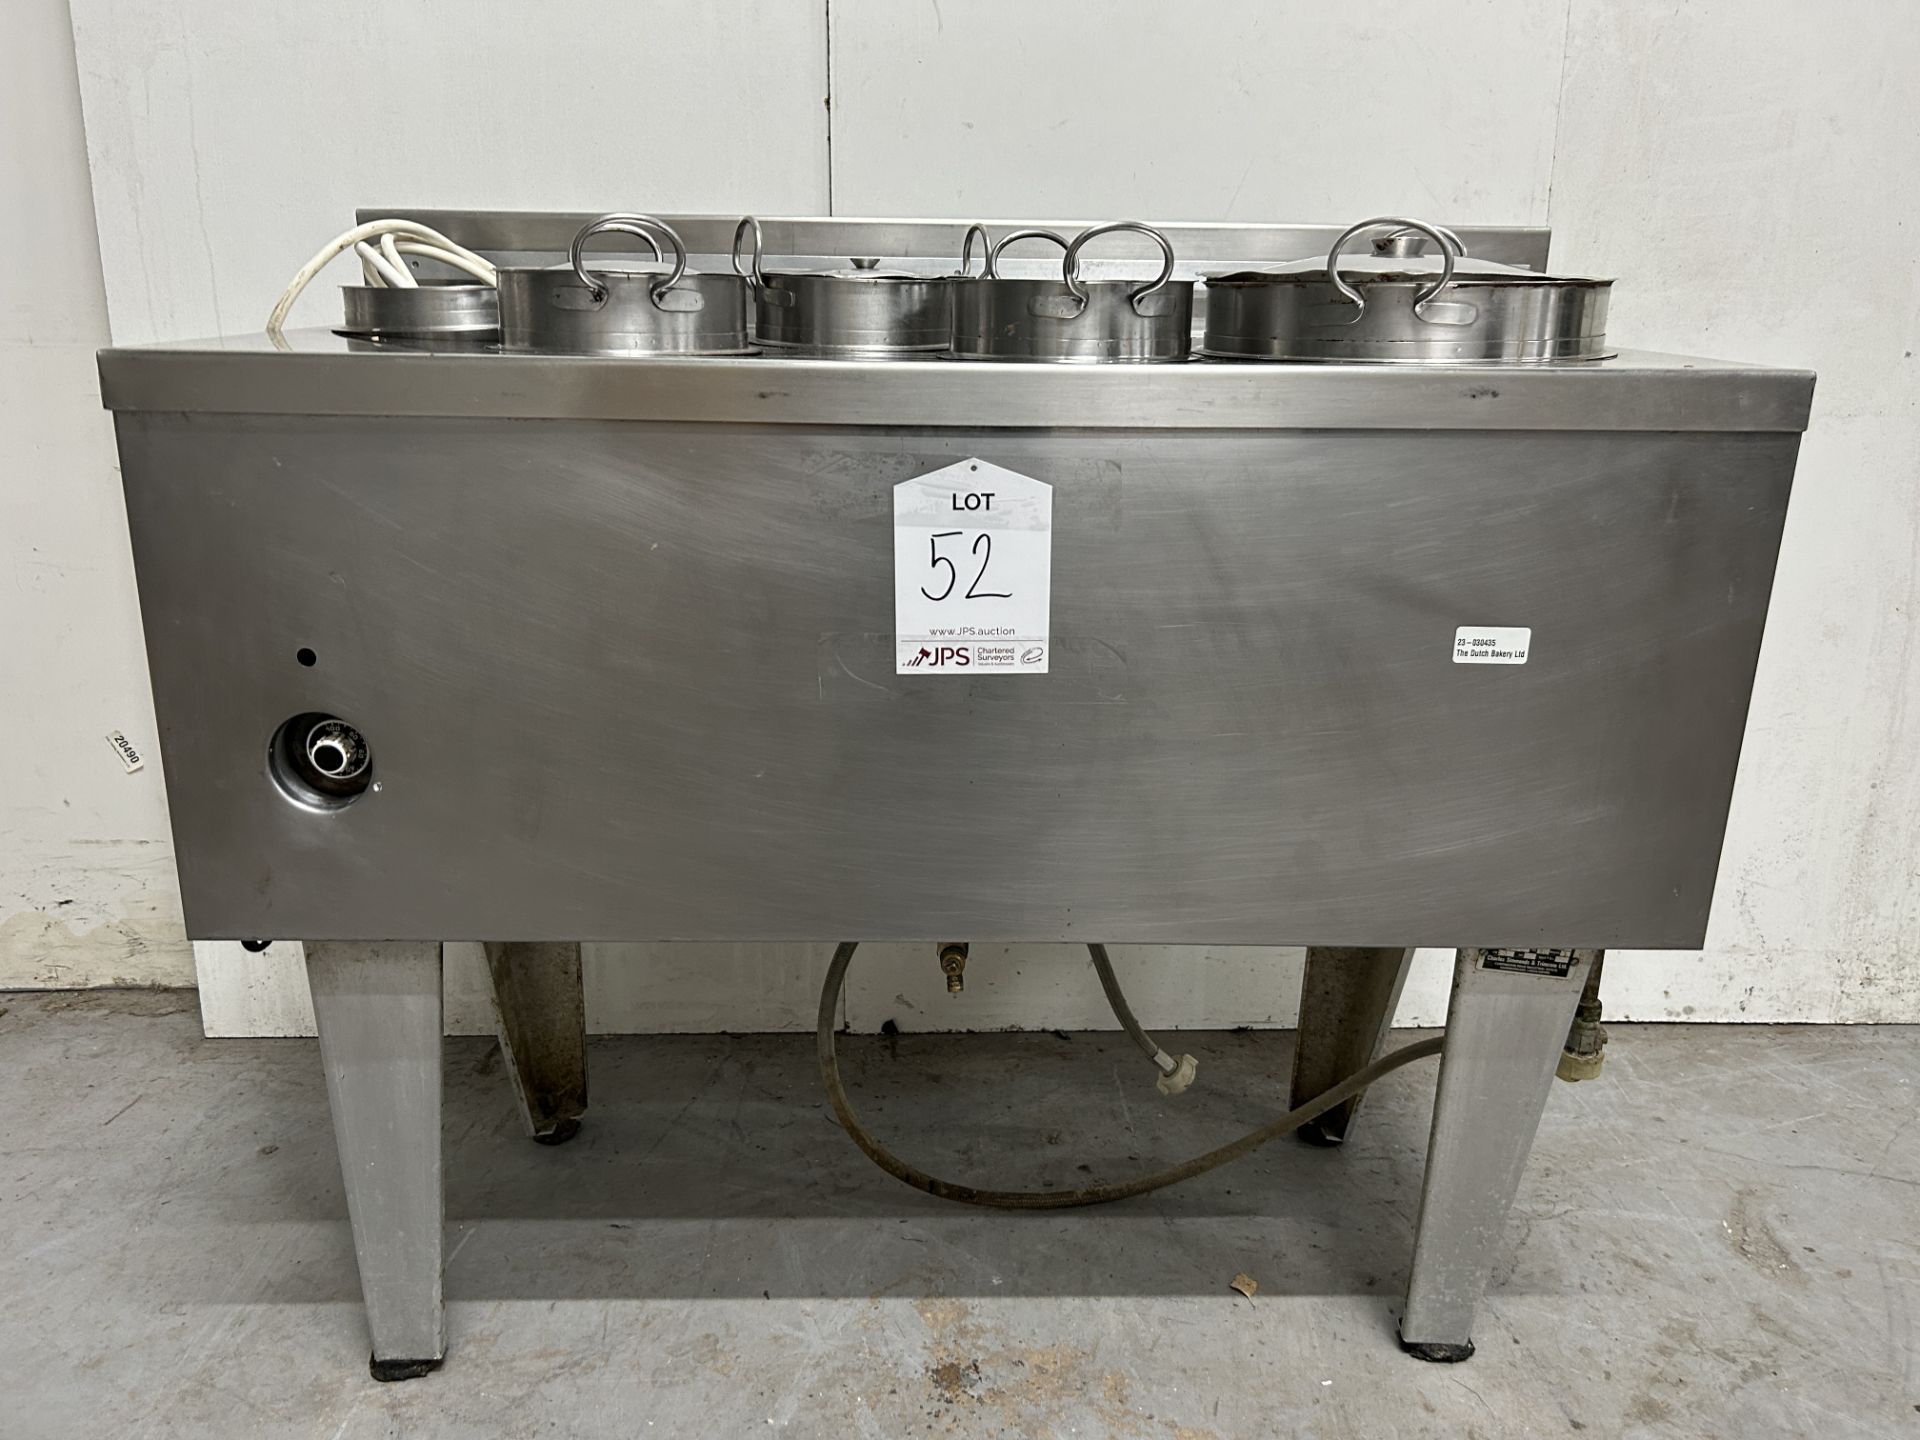 Stainless Steel Charles Simmonds 5 Pan Commercial Bain Marie | 110.5cm x 47cm x 93.5cm | LOCATED IN